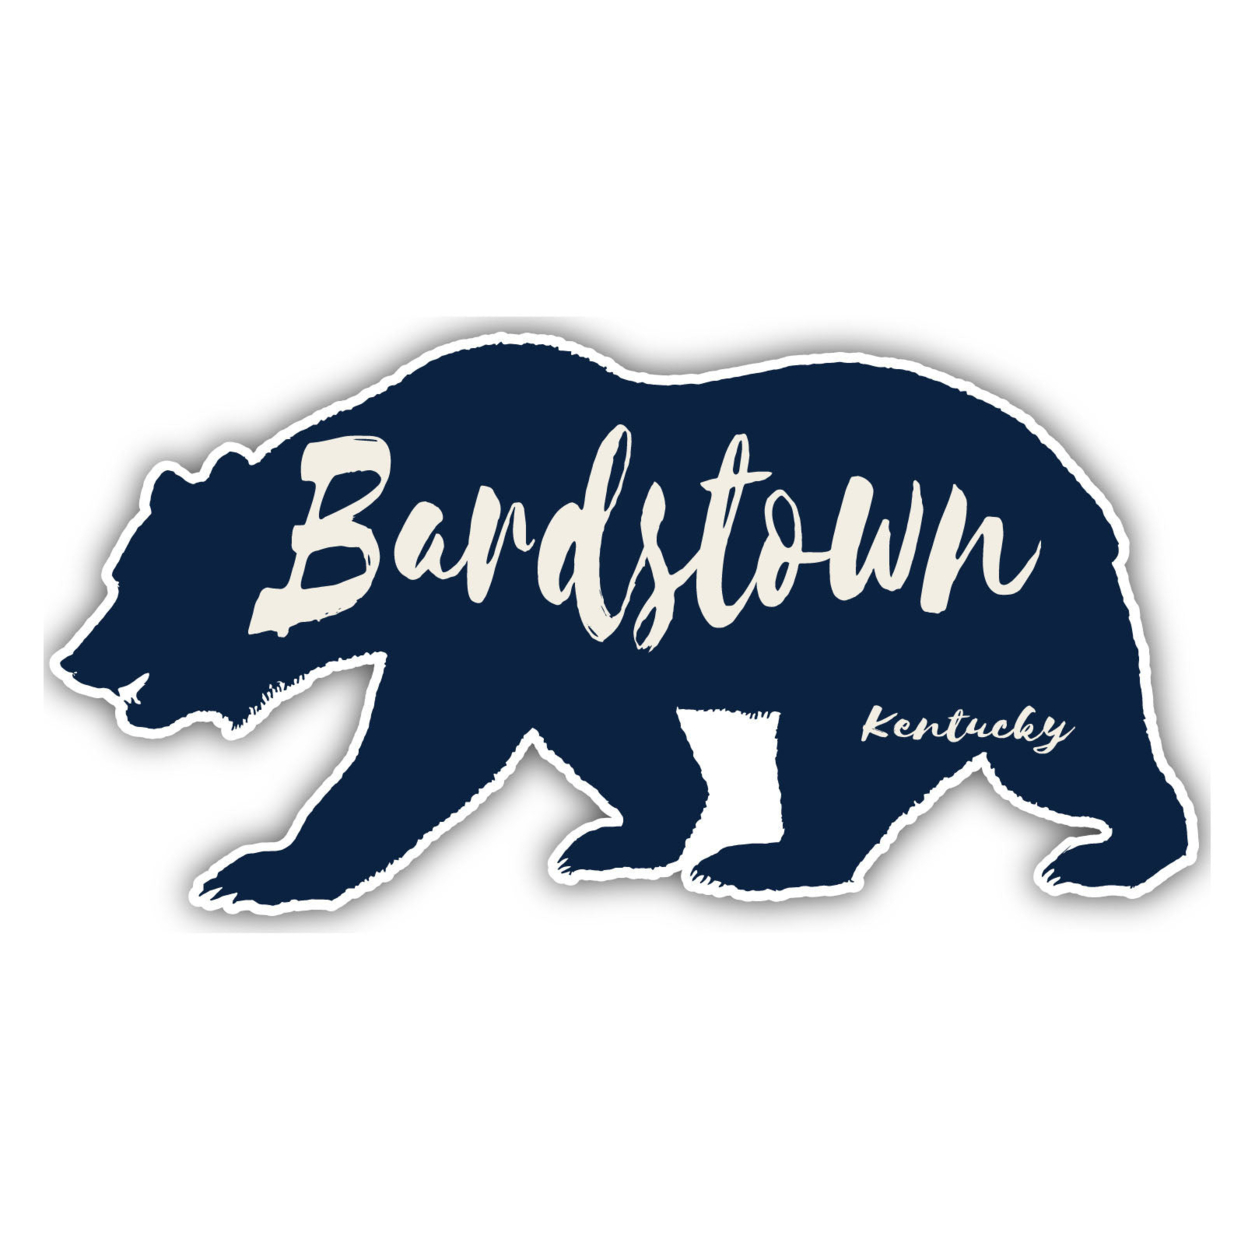 Bardstown Kentucky Souvenir Decorative Stickers (Choose Theme And Size) - 4-Pack, 10-Inch, Bear